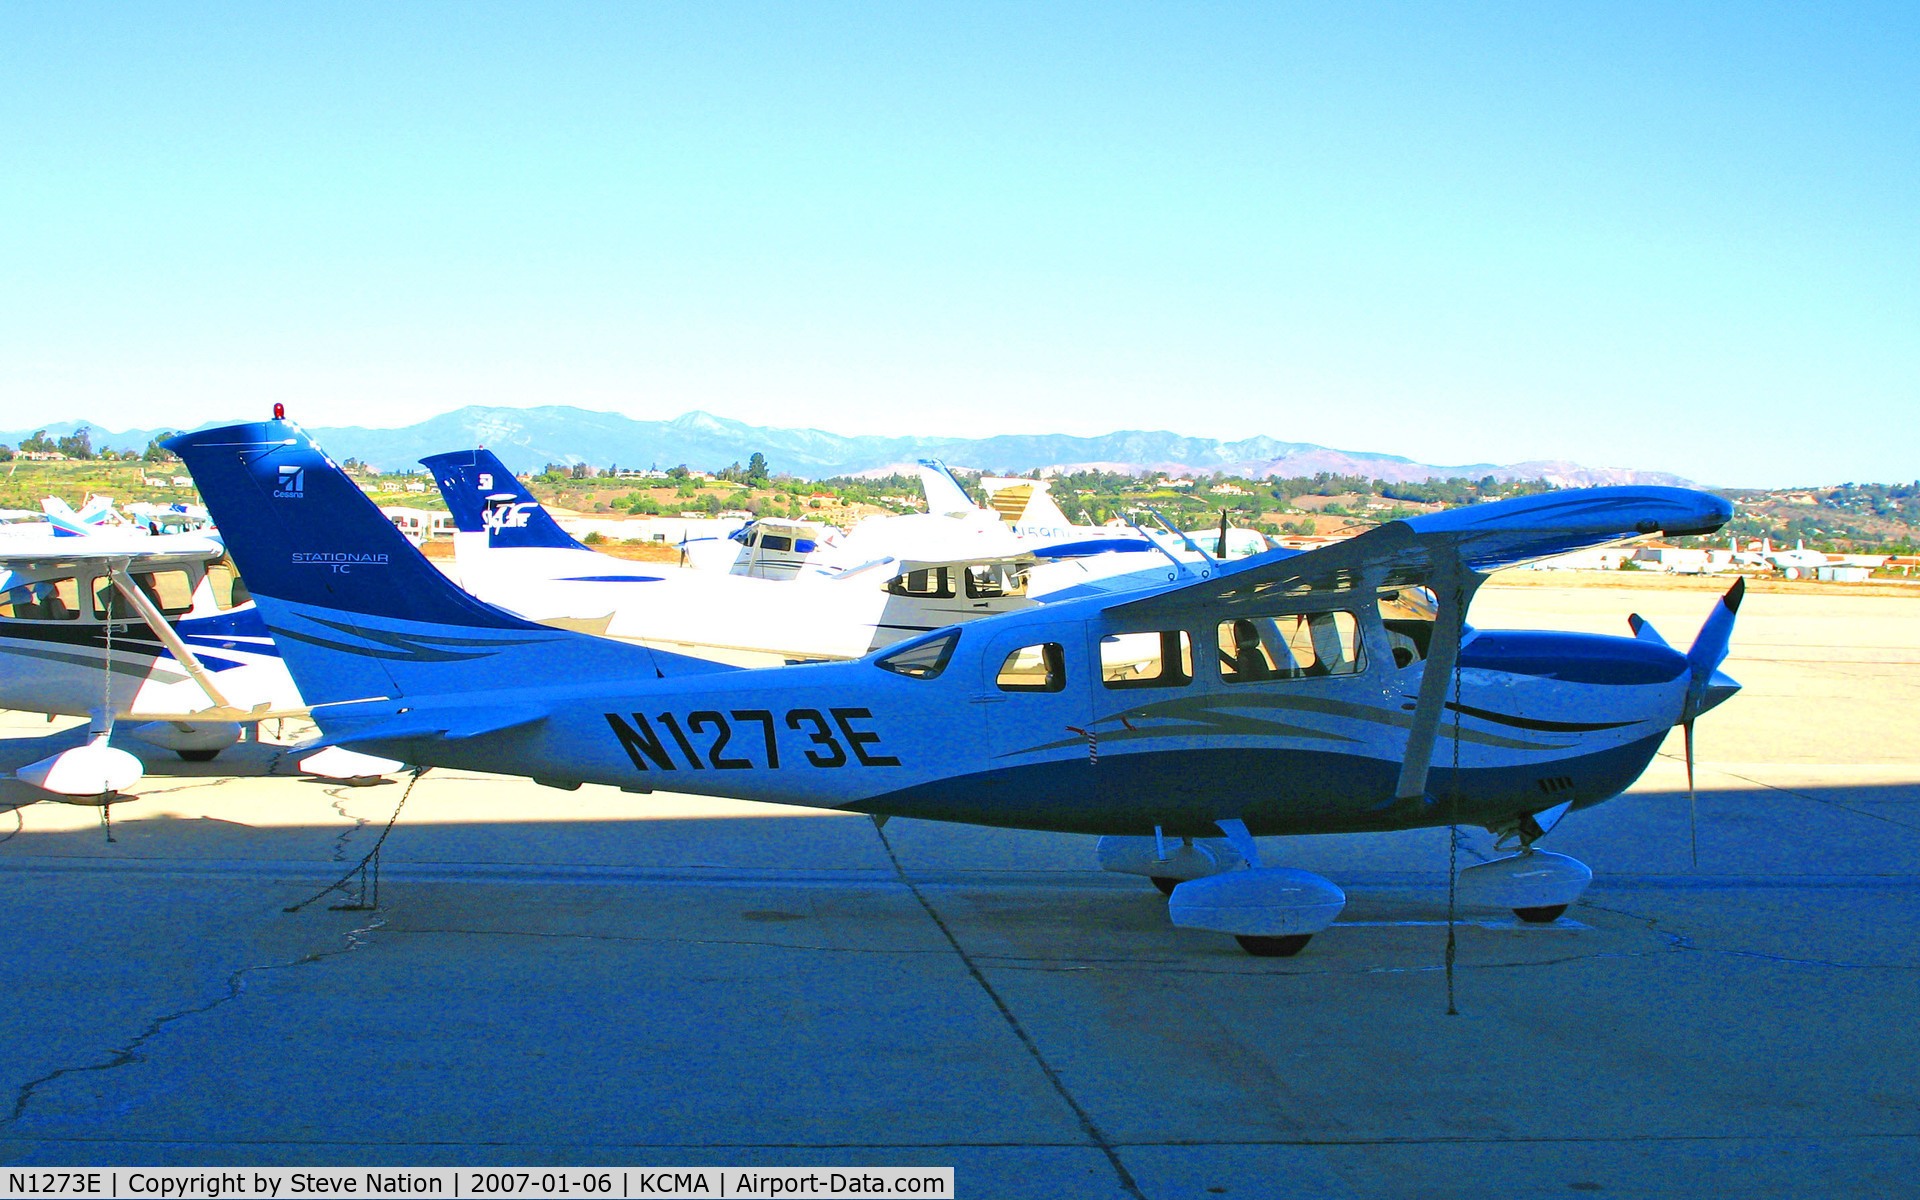 N1273E, 2006 Cessna T206H Turbo Stationair C/N T20608678, 2006 Cessna T206H on hangar at Camarillo Airport, CA home base on balmy, sunny January 2007 picture postcard day (experienced landing accident at Grand Canyon NP Airport, CO on April 28,2007; re-registered N127JE))